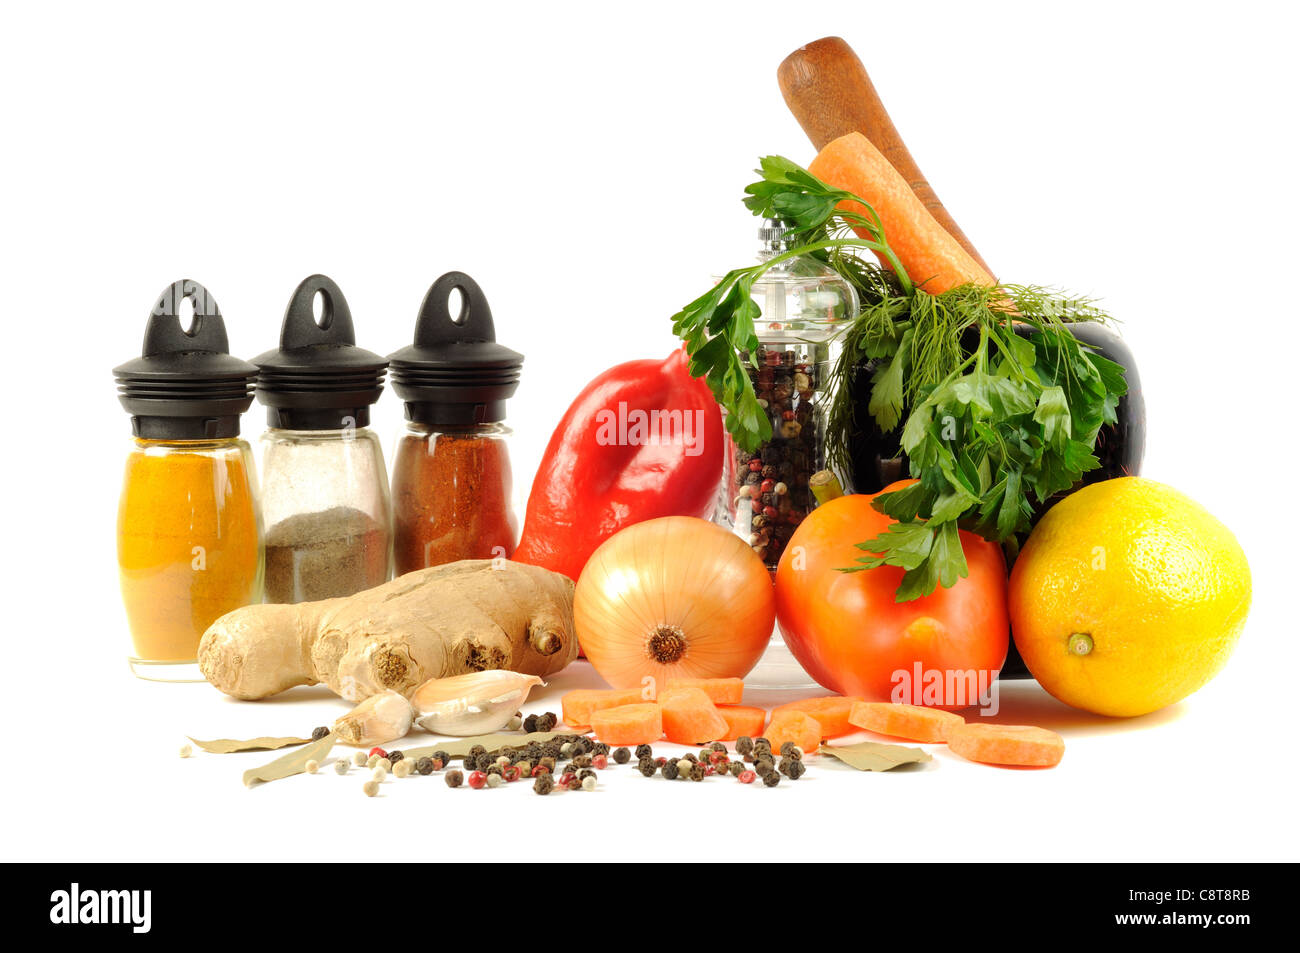 Vegetables and spice , on a white background Stock Photo